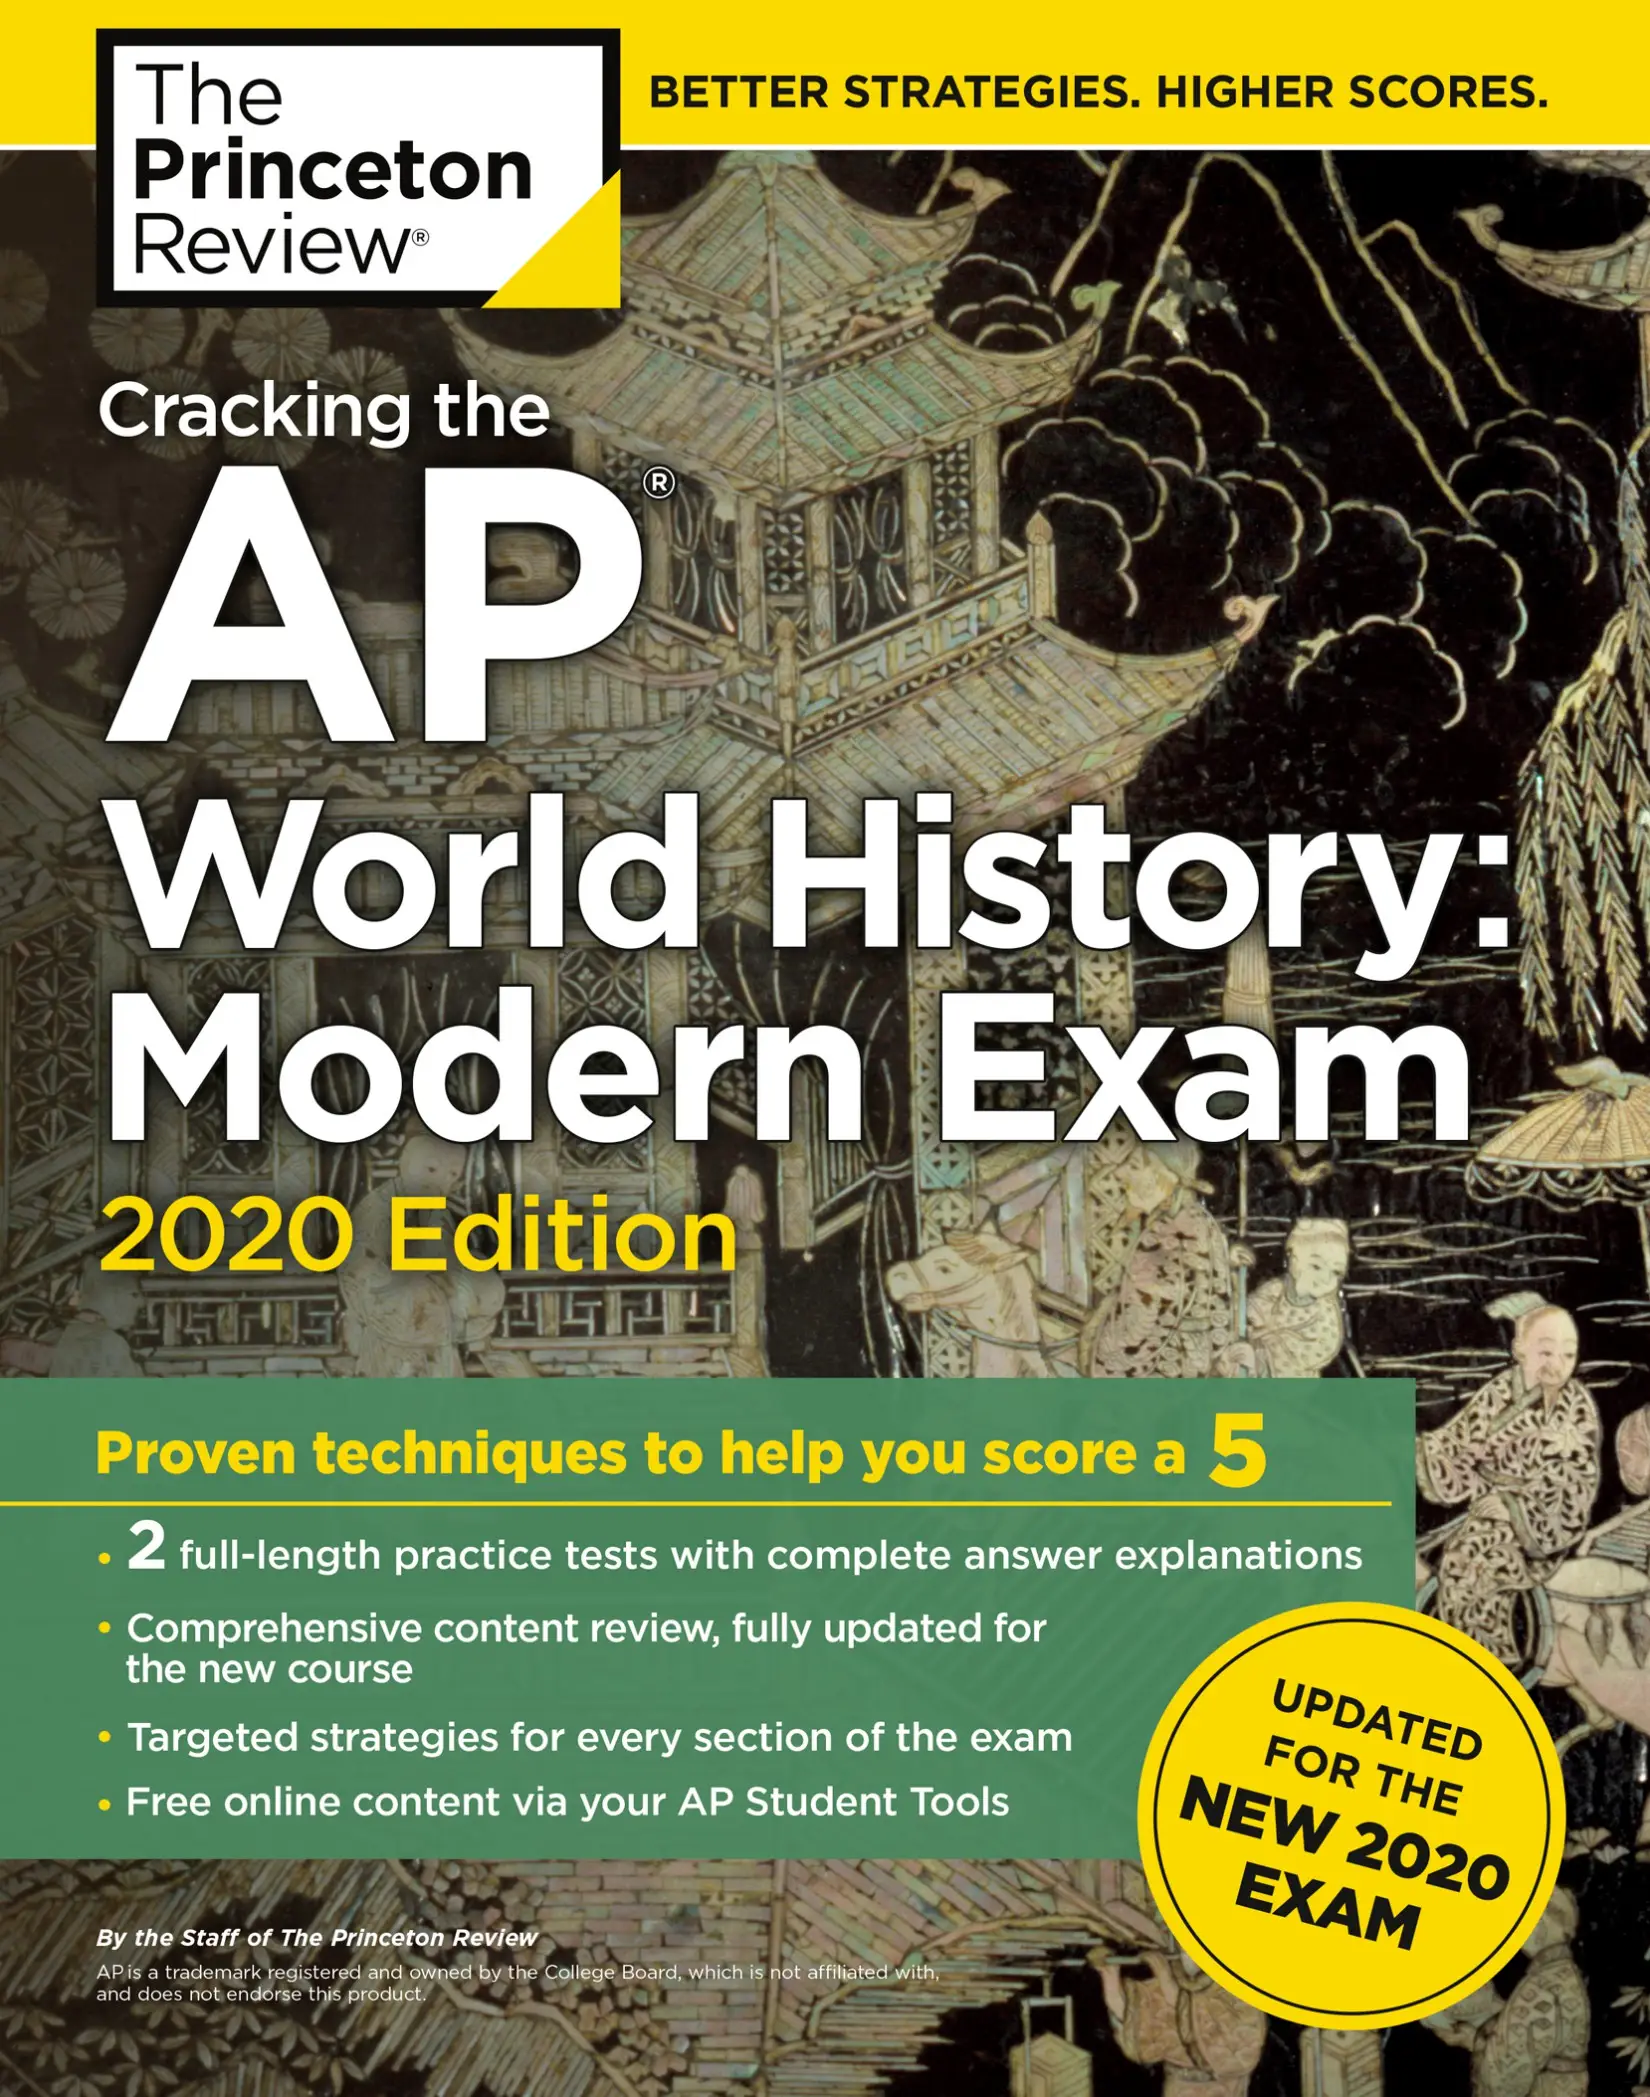 Cracking the AP World History Modern Exam, 2020 Edition Practice